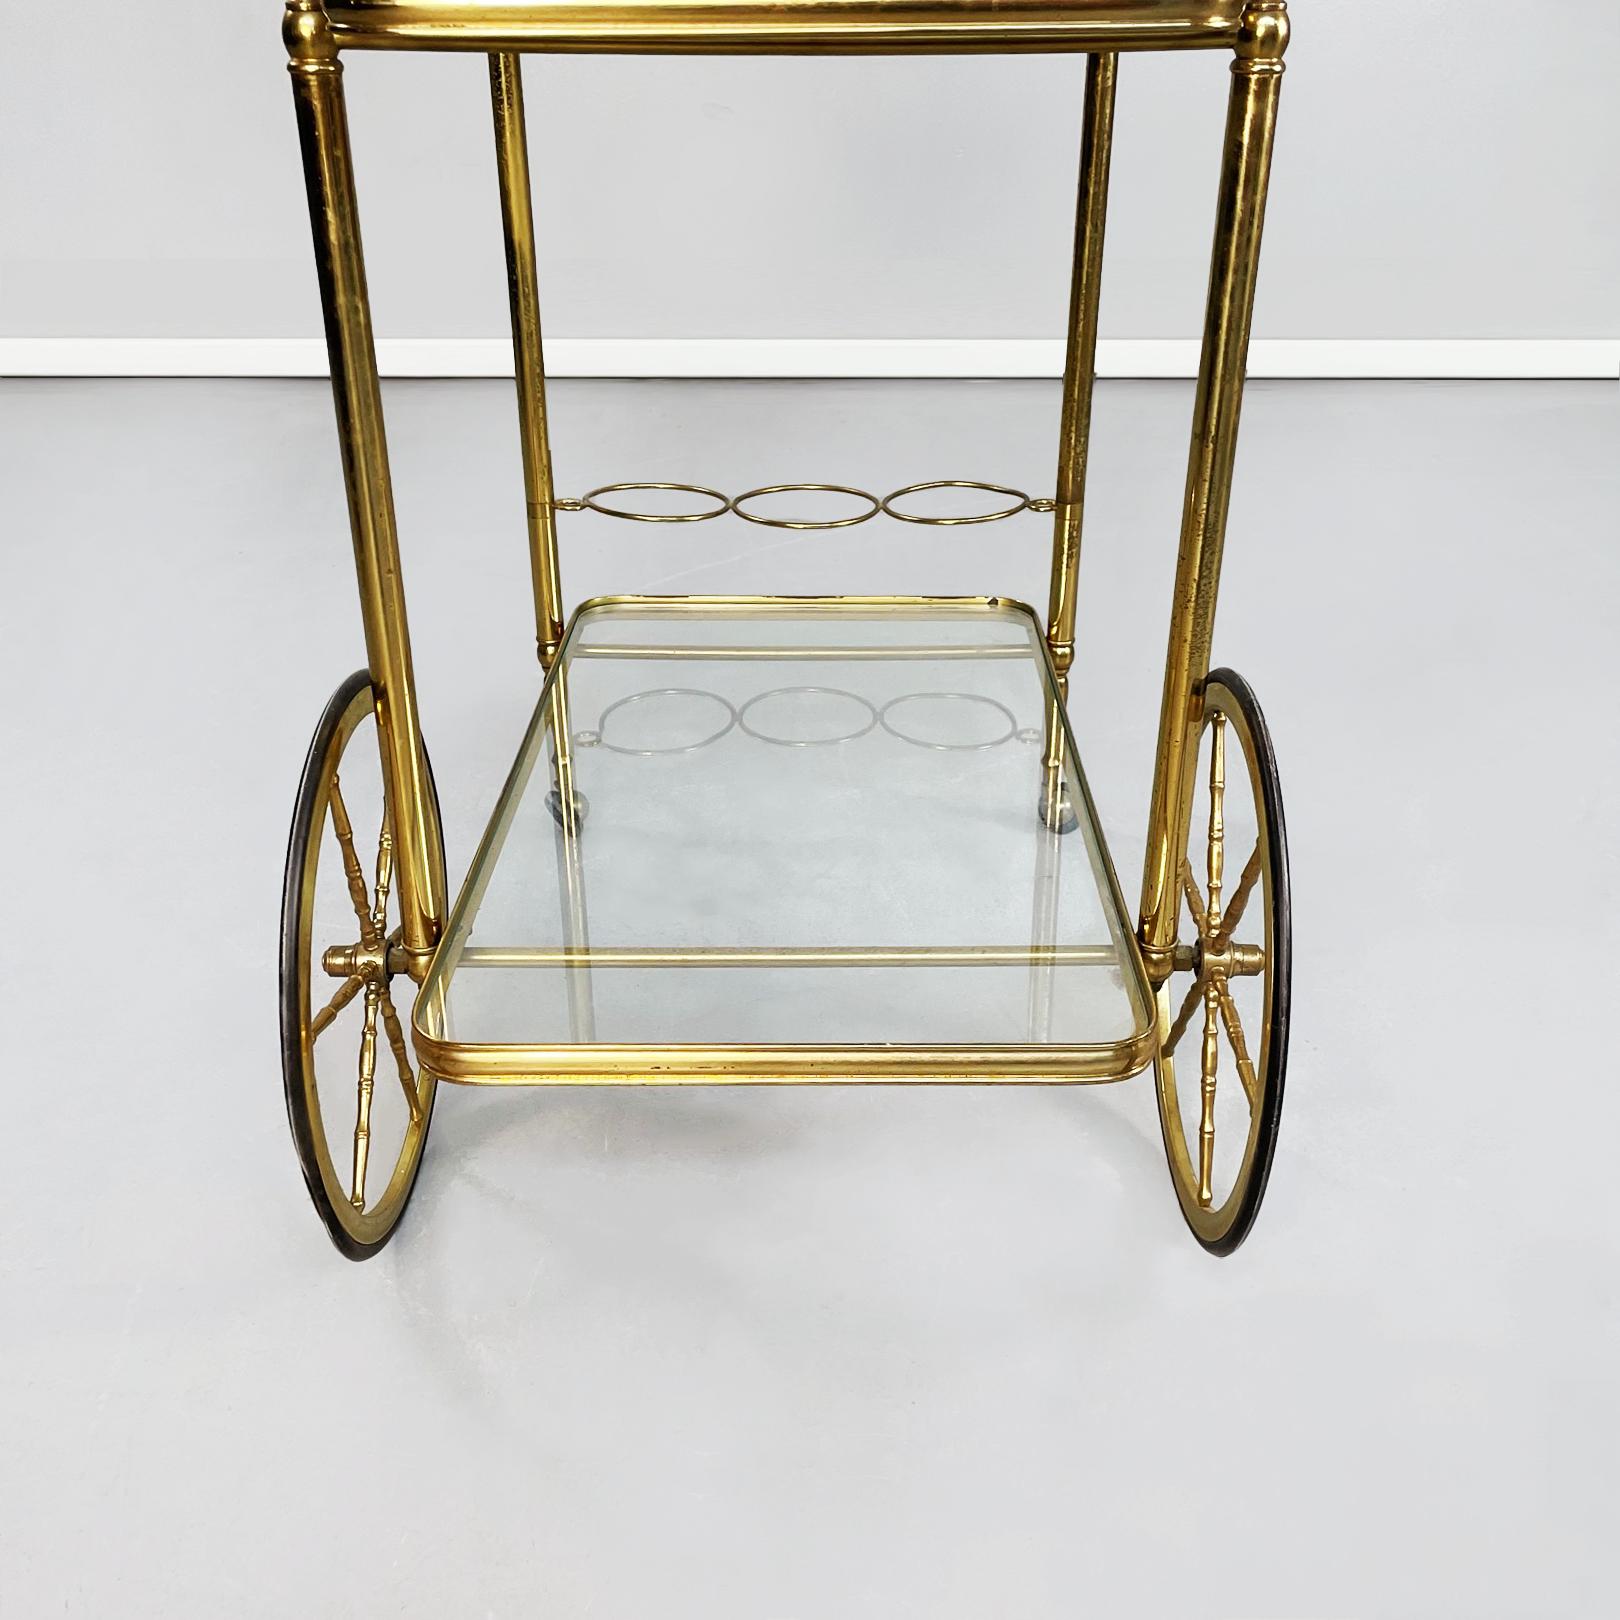 Mid-20th Century Italian Mid-Century Modern Bar Cart in Brass and Glass, 1950s For Sale